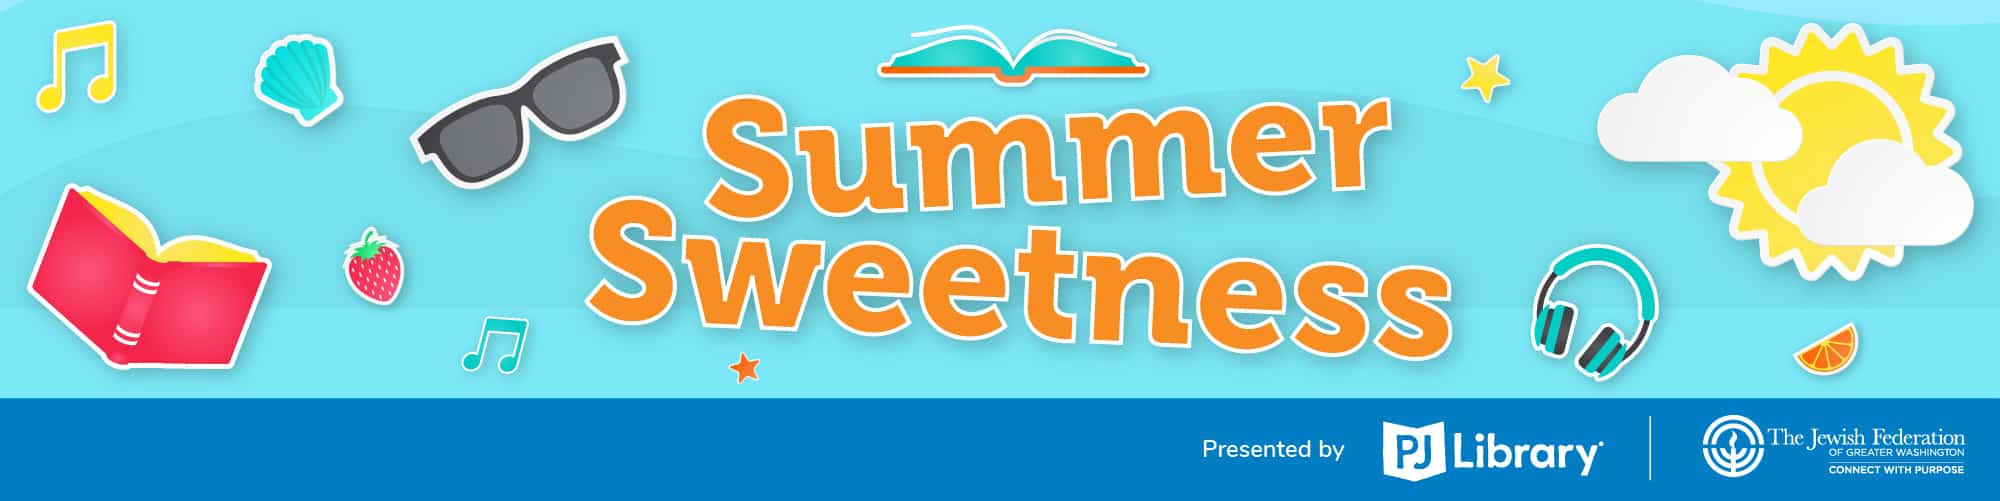 Summer Sweetness Banner with Illustrations of Sun, Sunglasses, Headphones, a book and fruit.